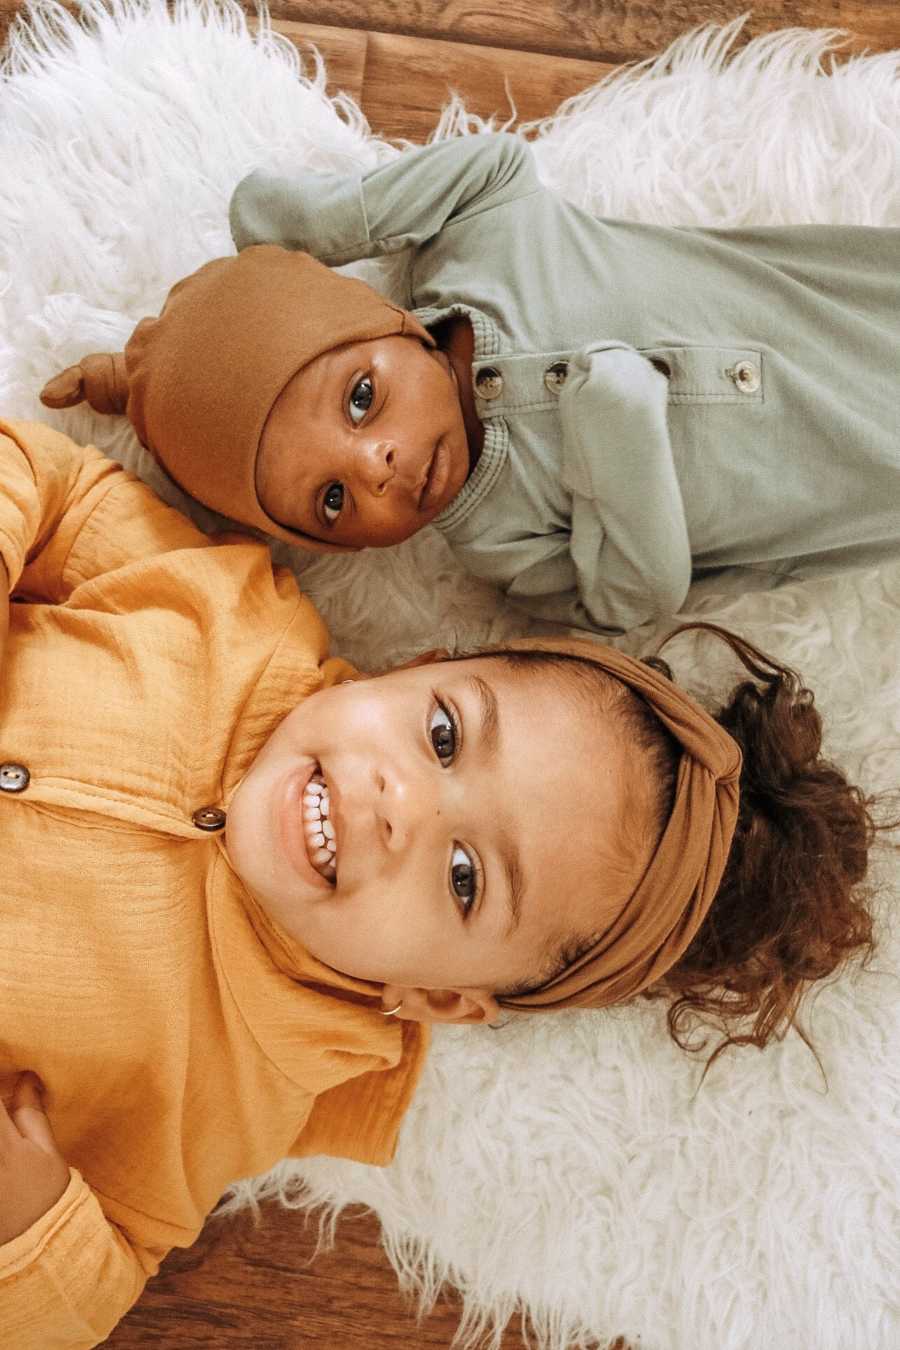 Adopted little girl lays smiling on her back with adopted baby brother beside her